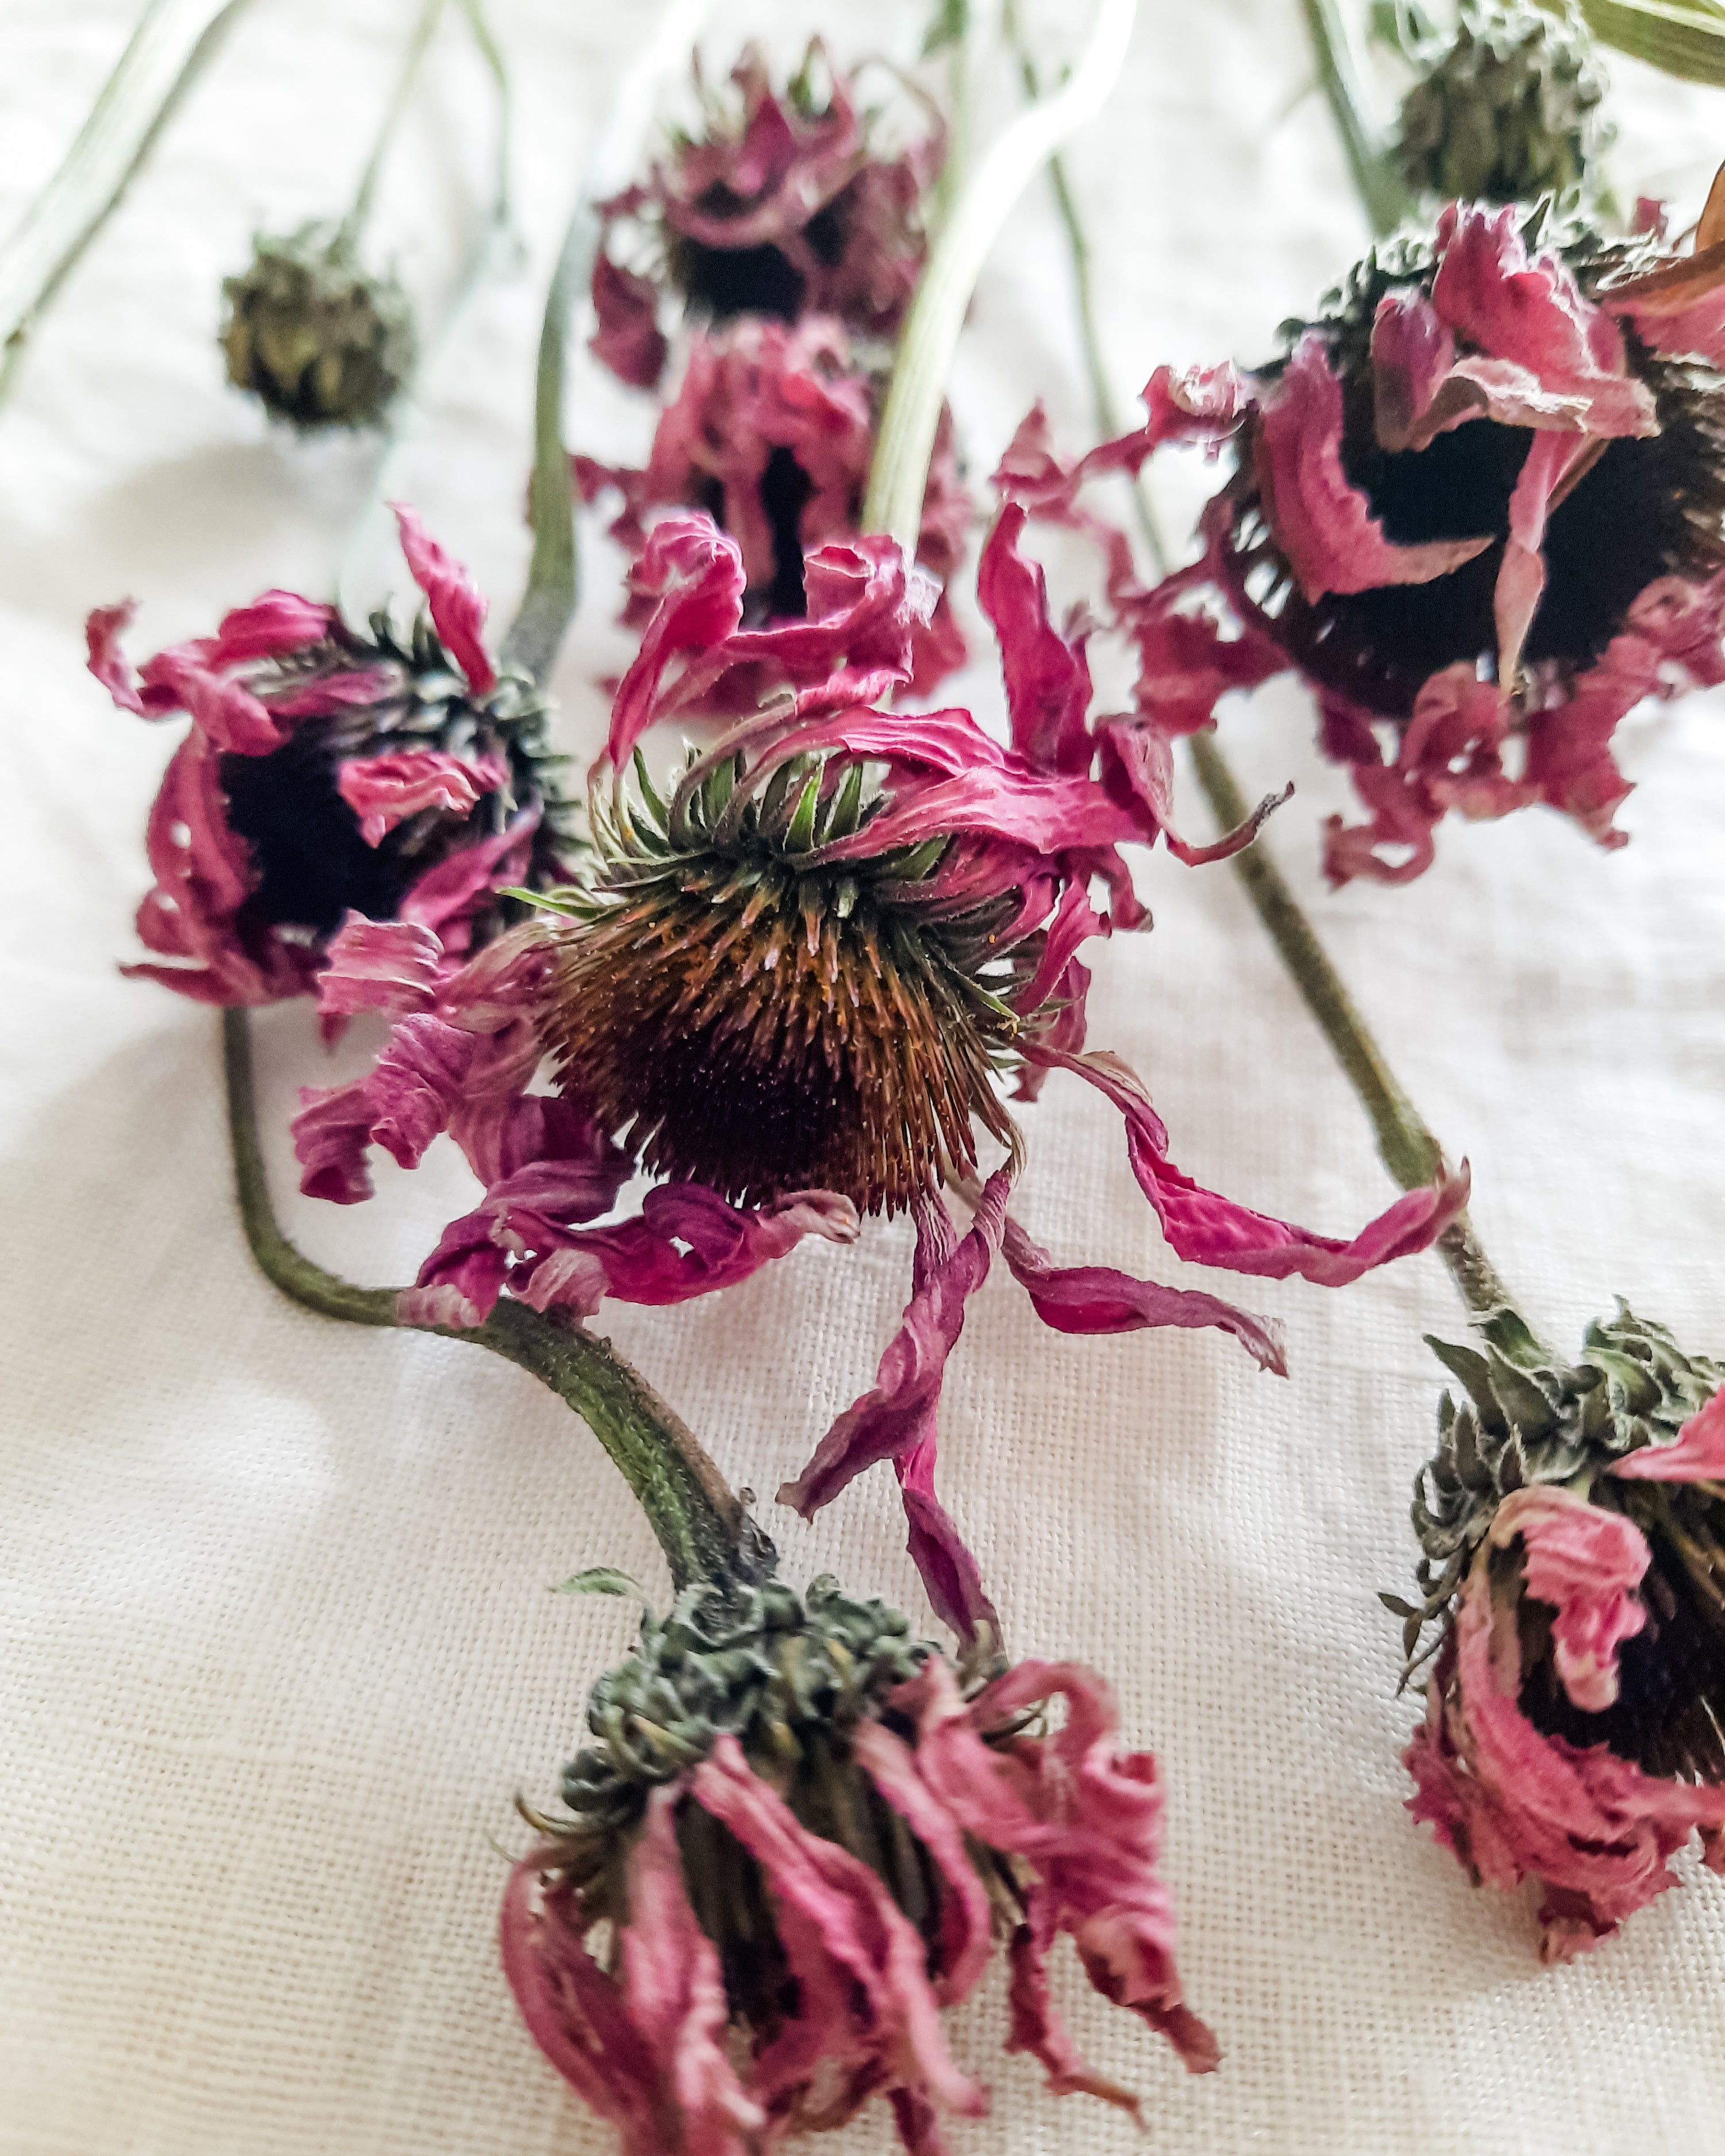 Dried flowers featuring echinacea